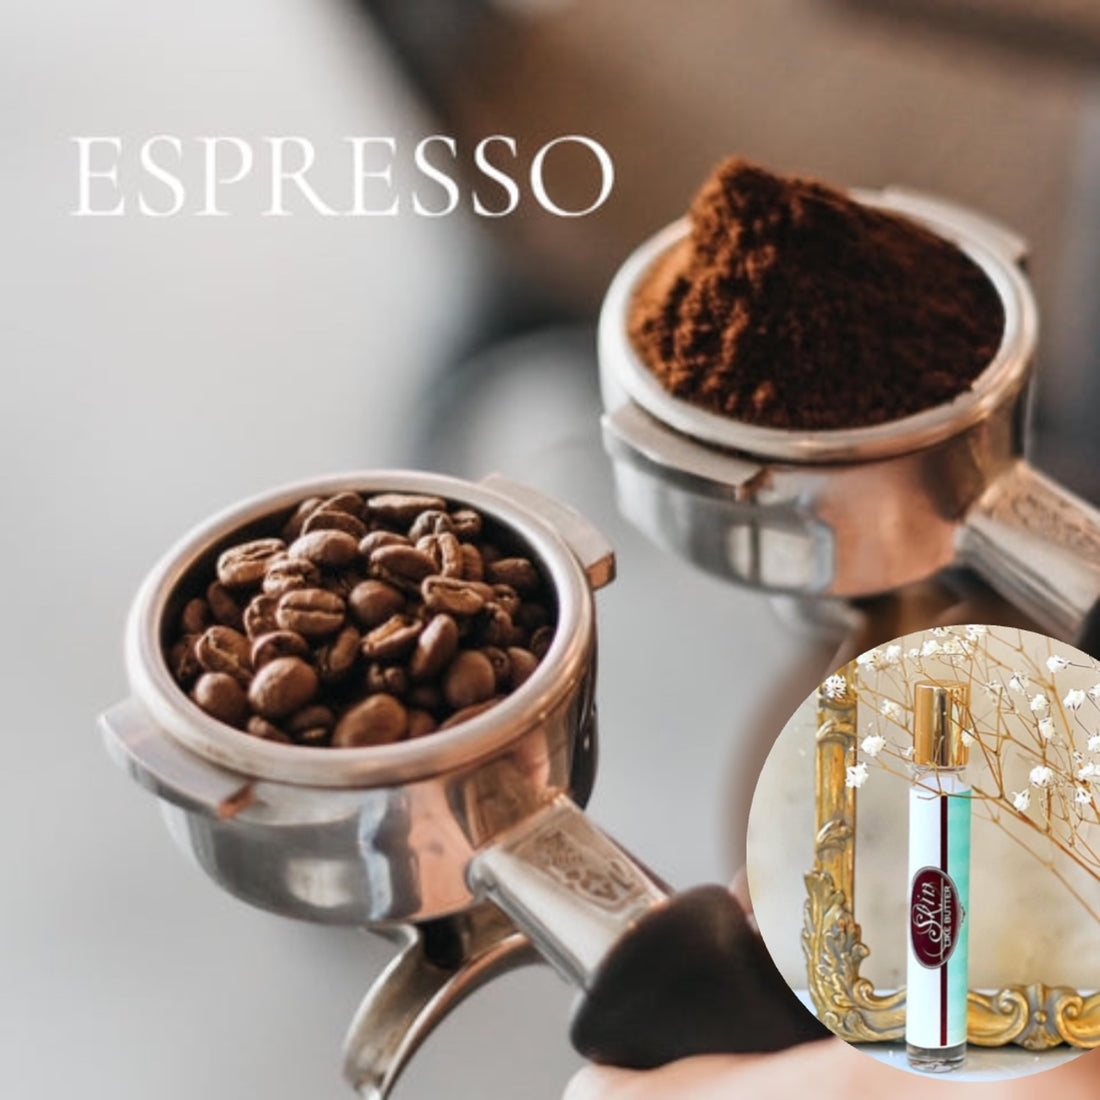 ESPRESSO Roll on Perfume Sale! ~ Buy 1 get 1 50% off-use coupon code 2PLEASE